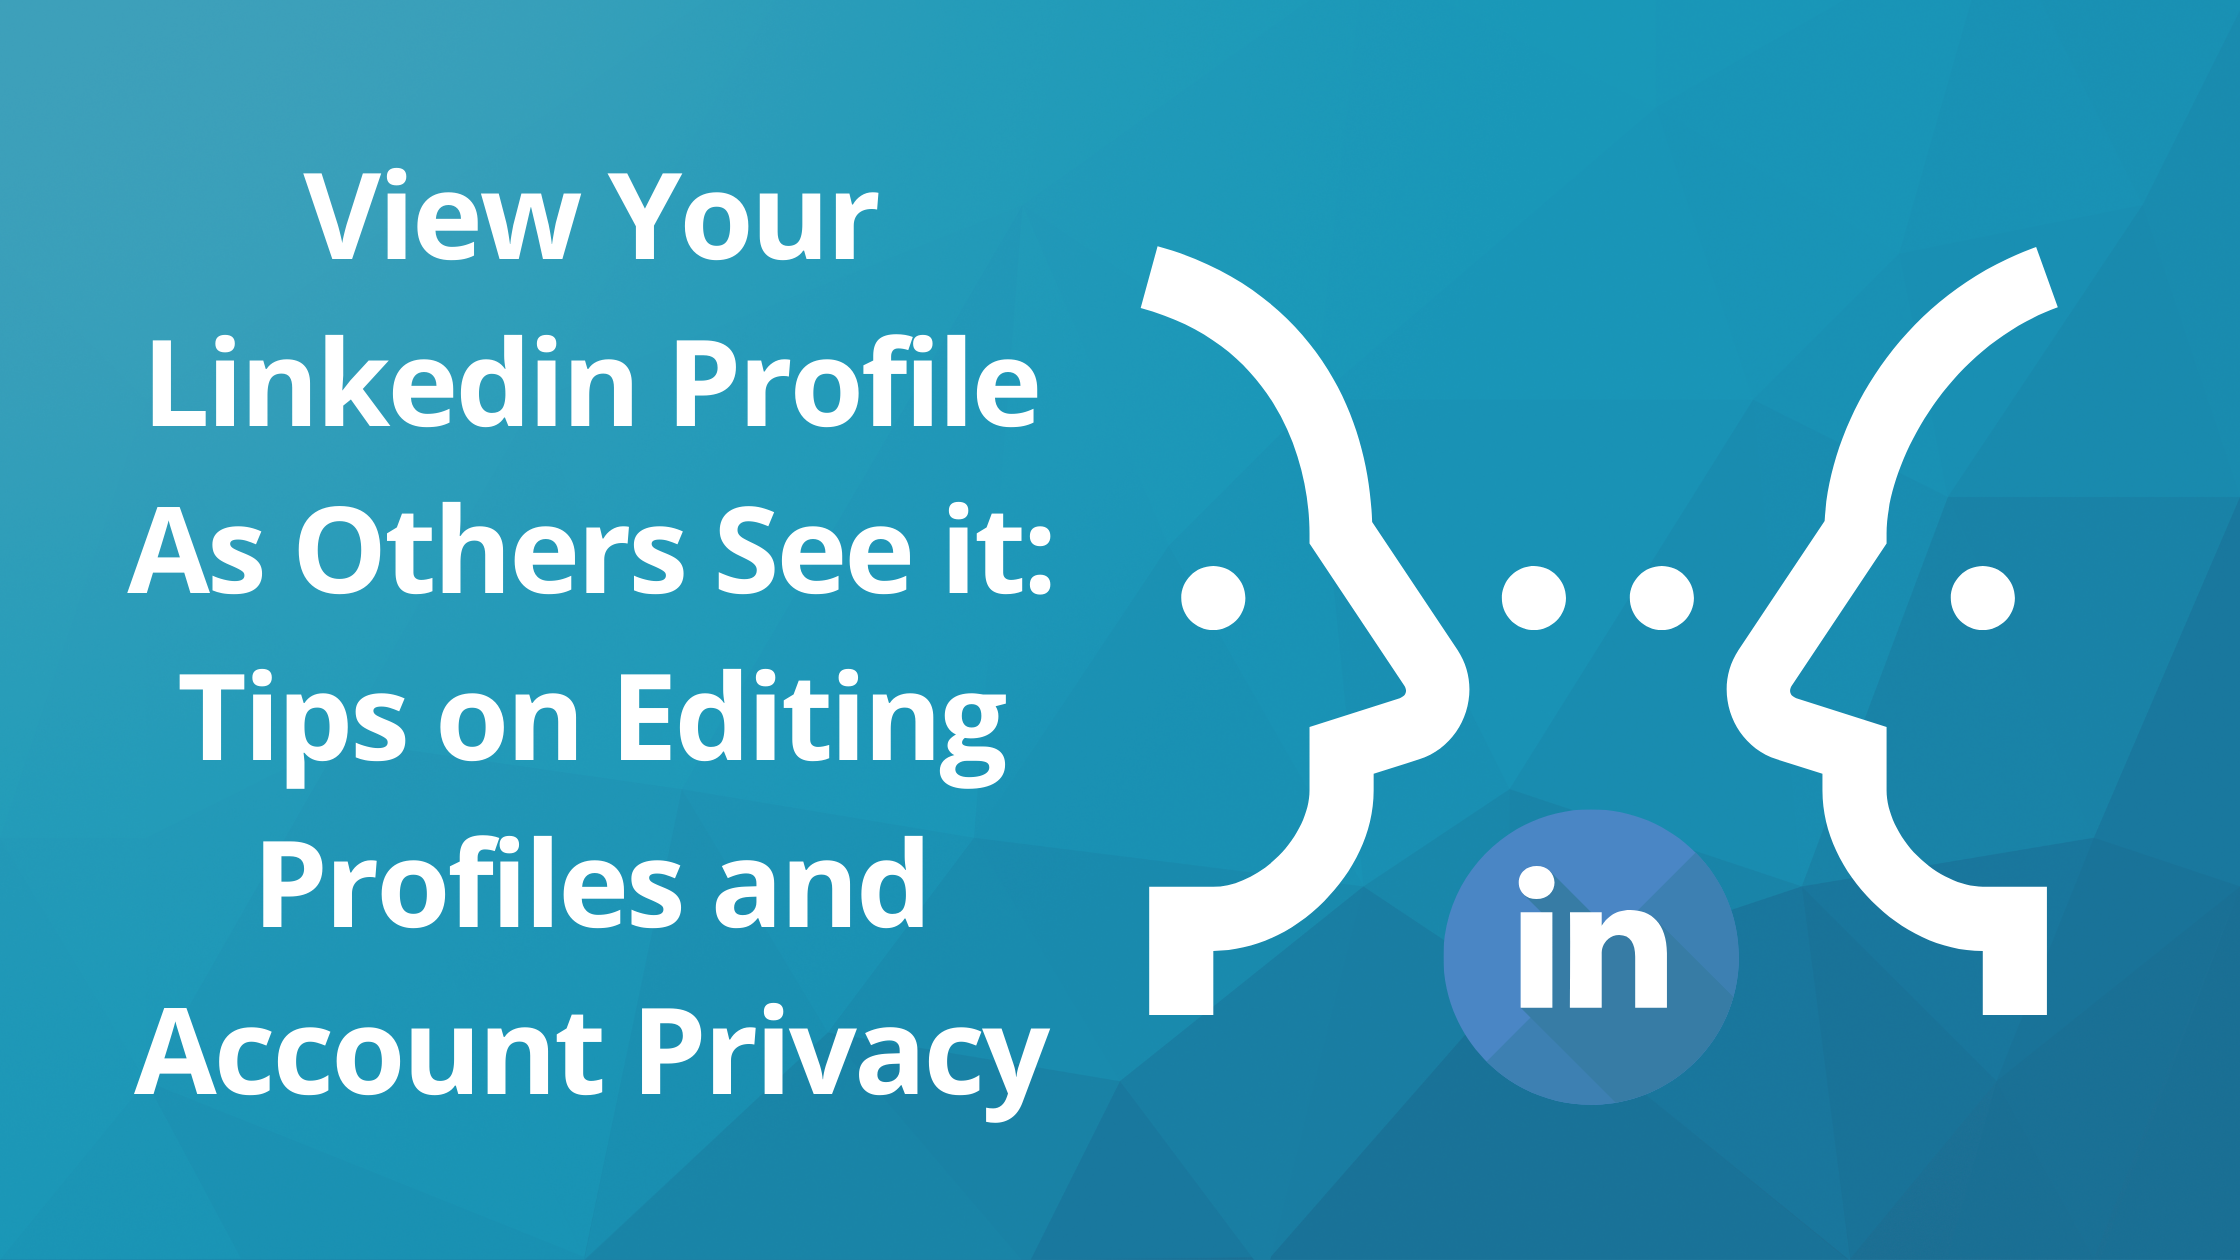 View Your Linkedin Profile As Others See it: Tips on Editing Profiles and Account Privacy